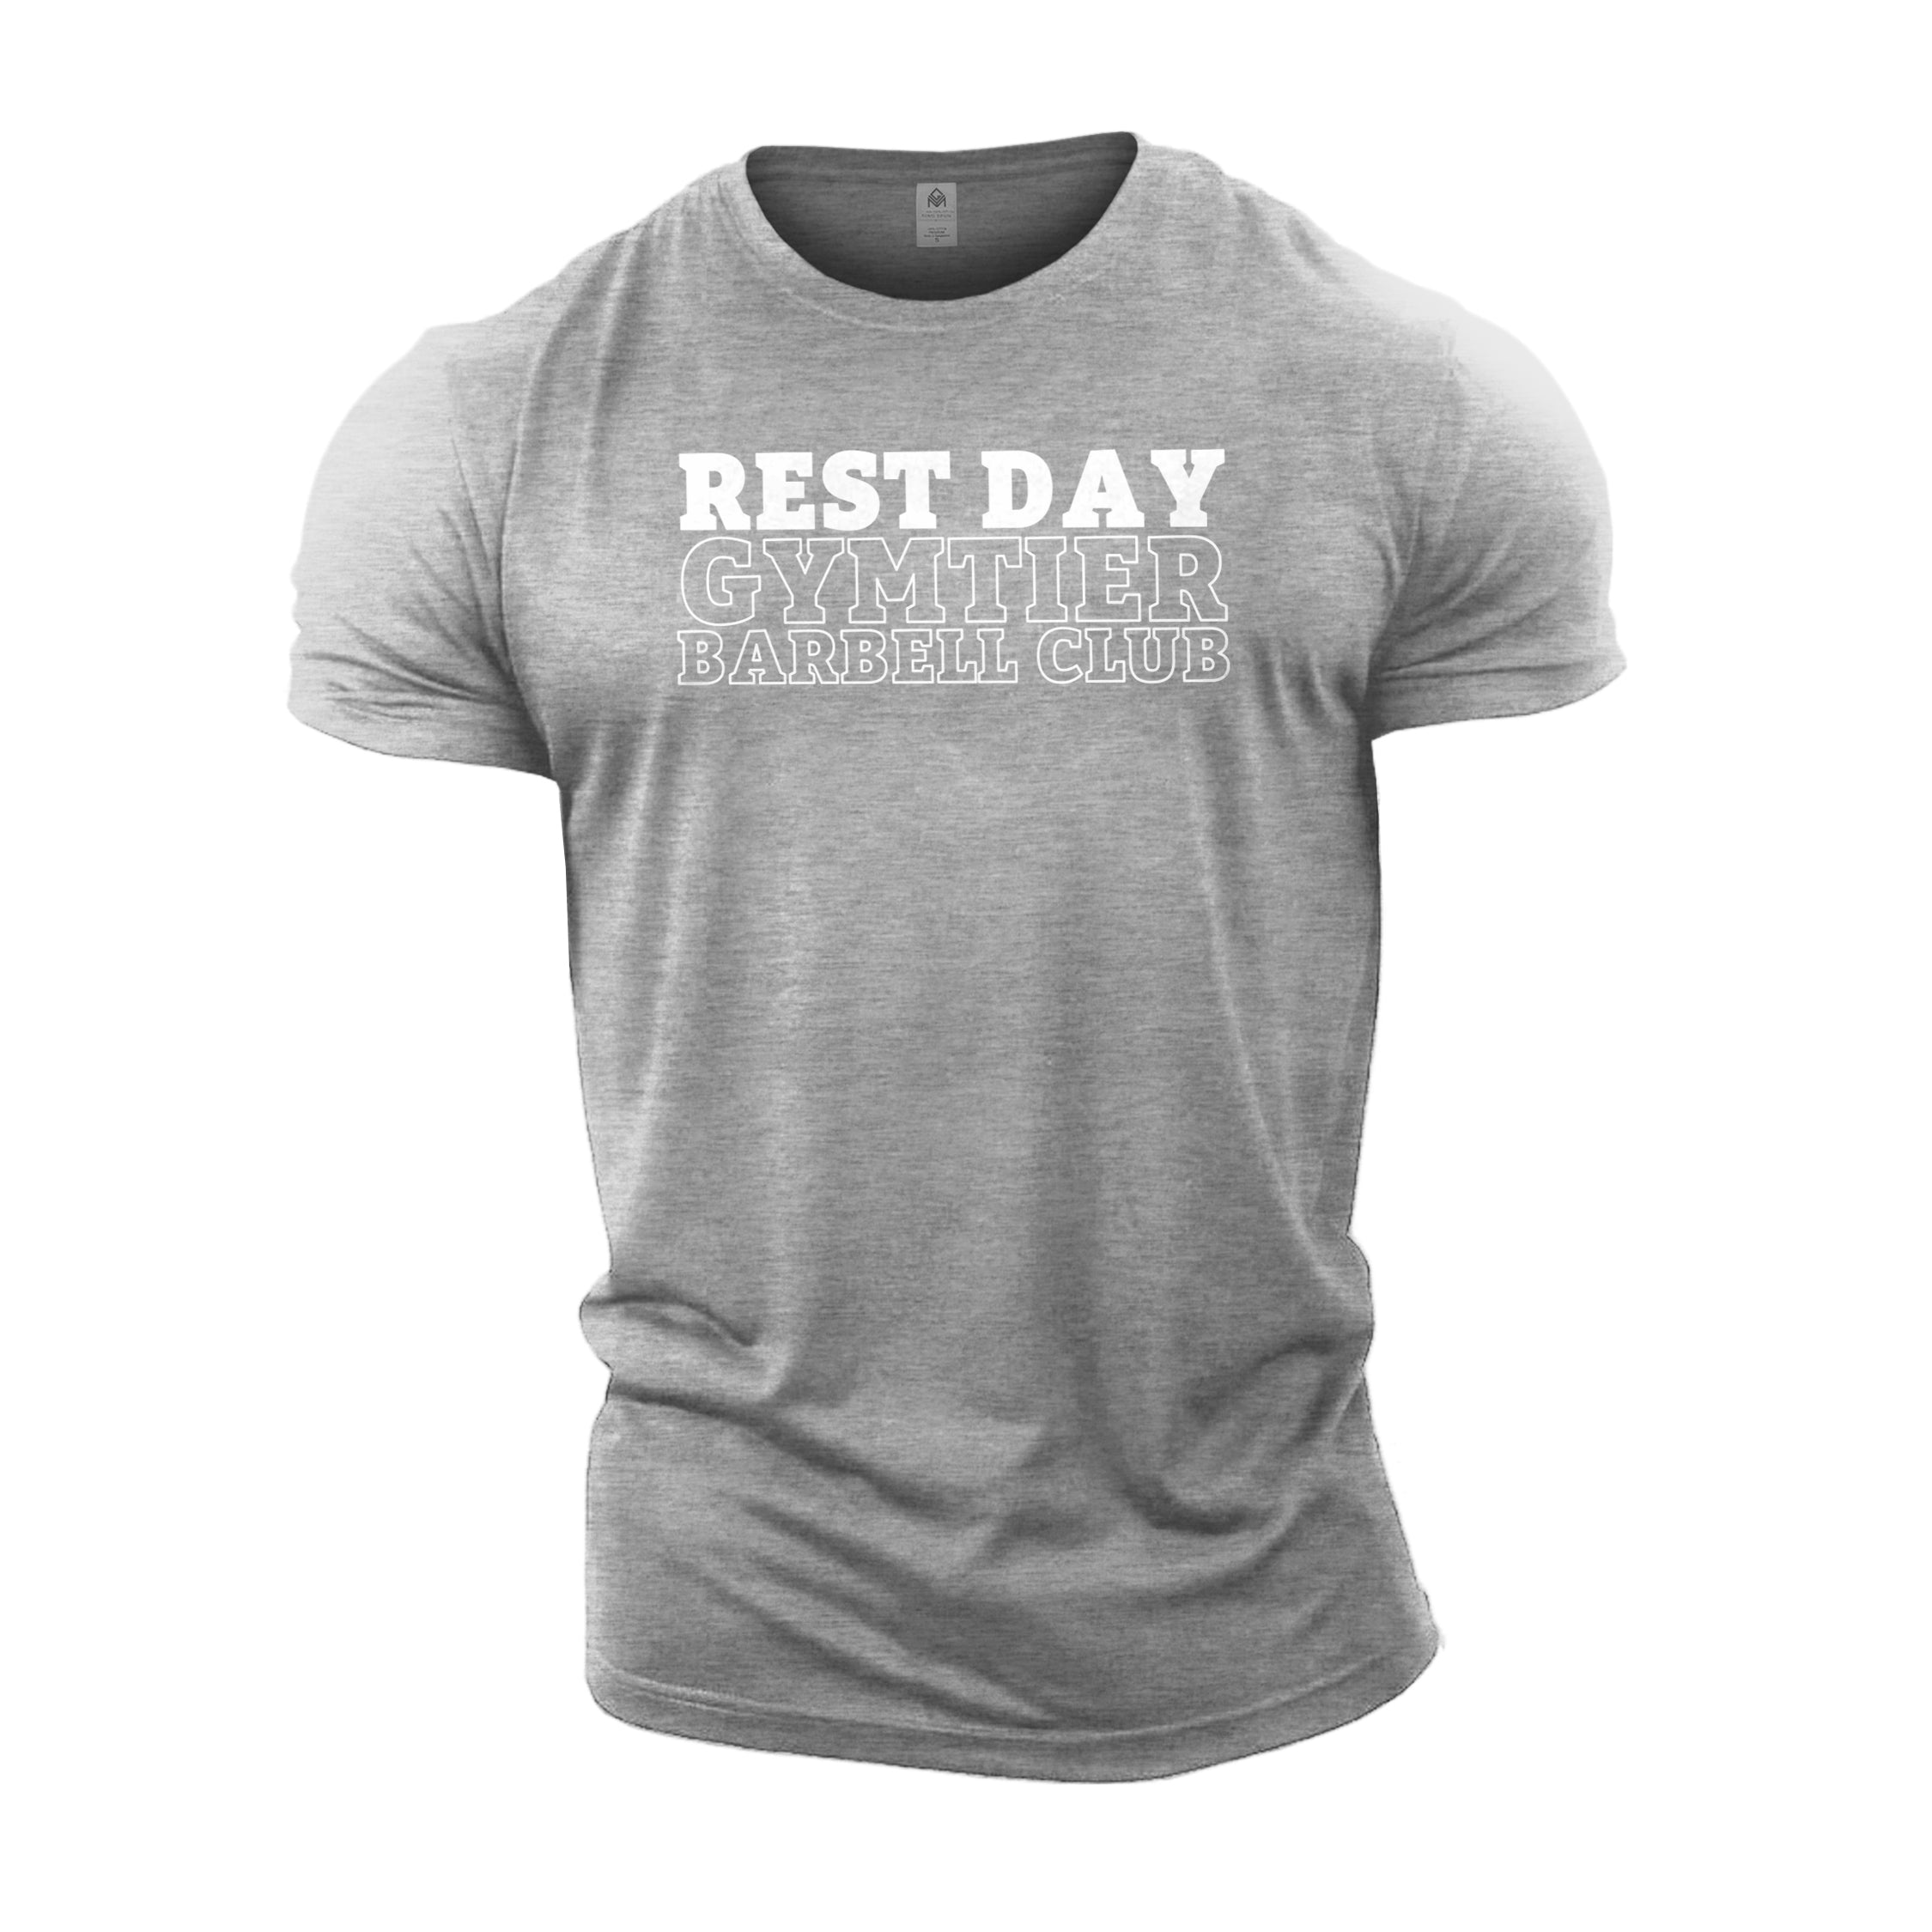 Gymtier Barbell Club - Rest Day - Gym T-Shirt